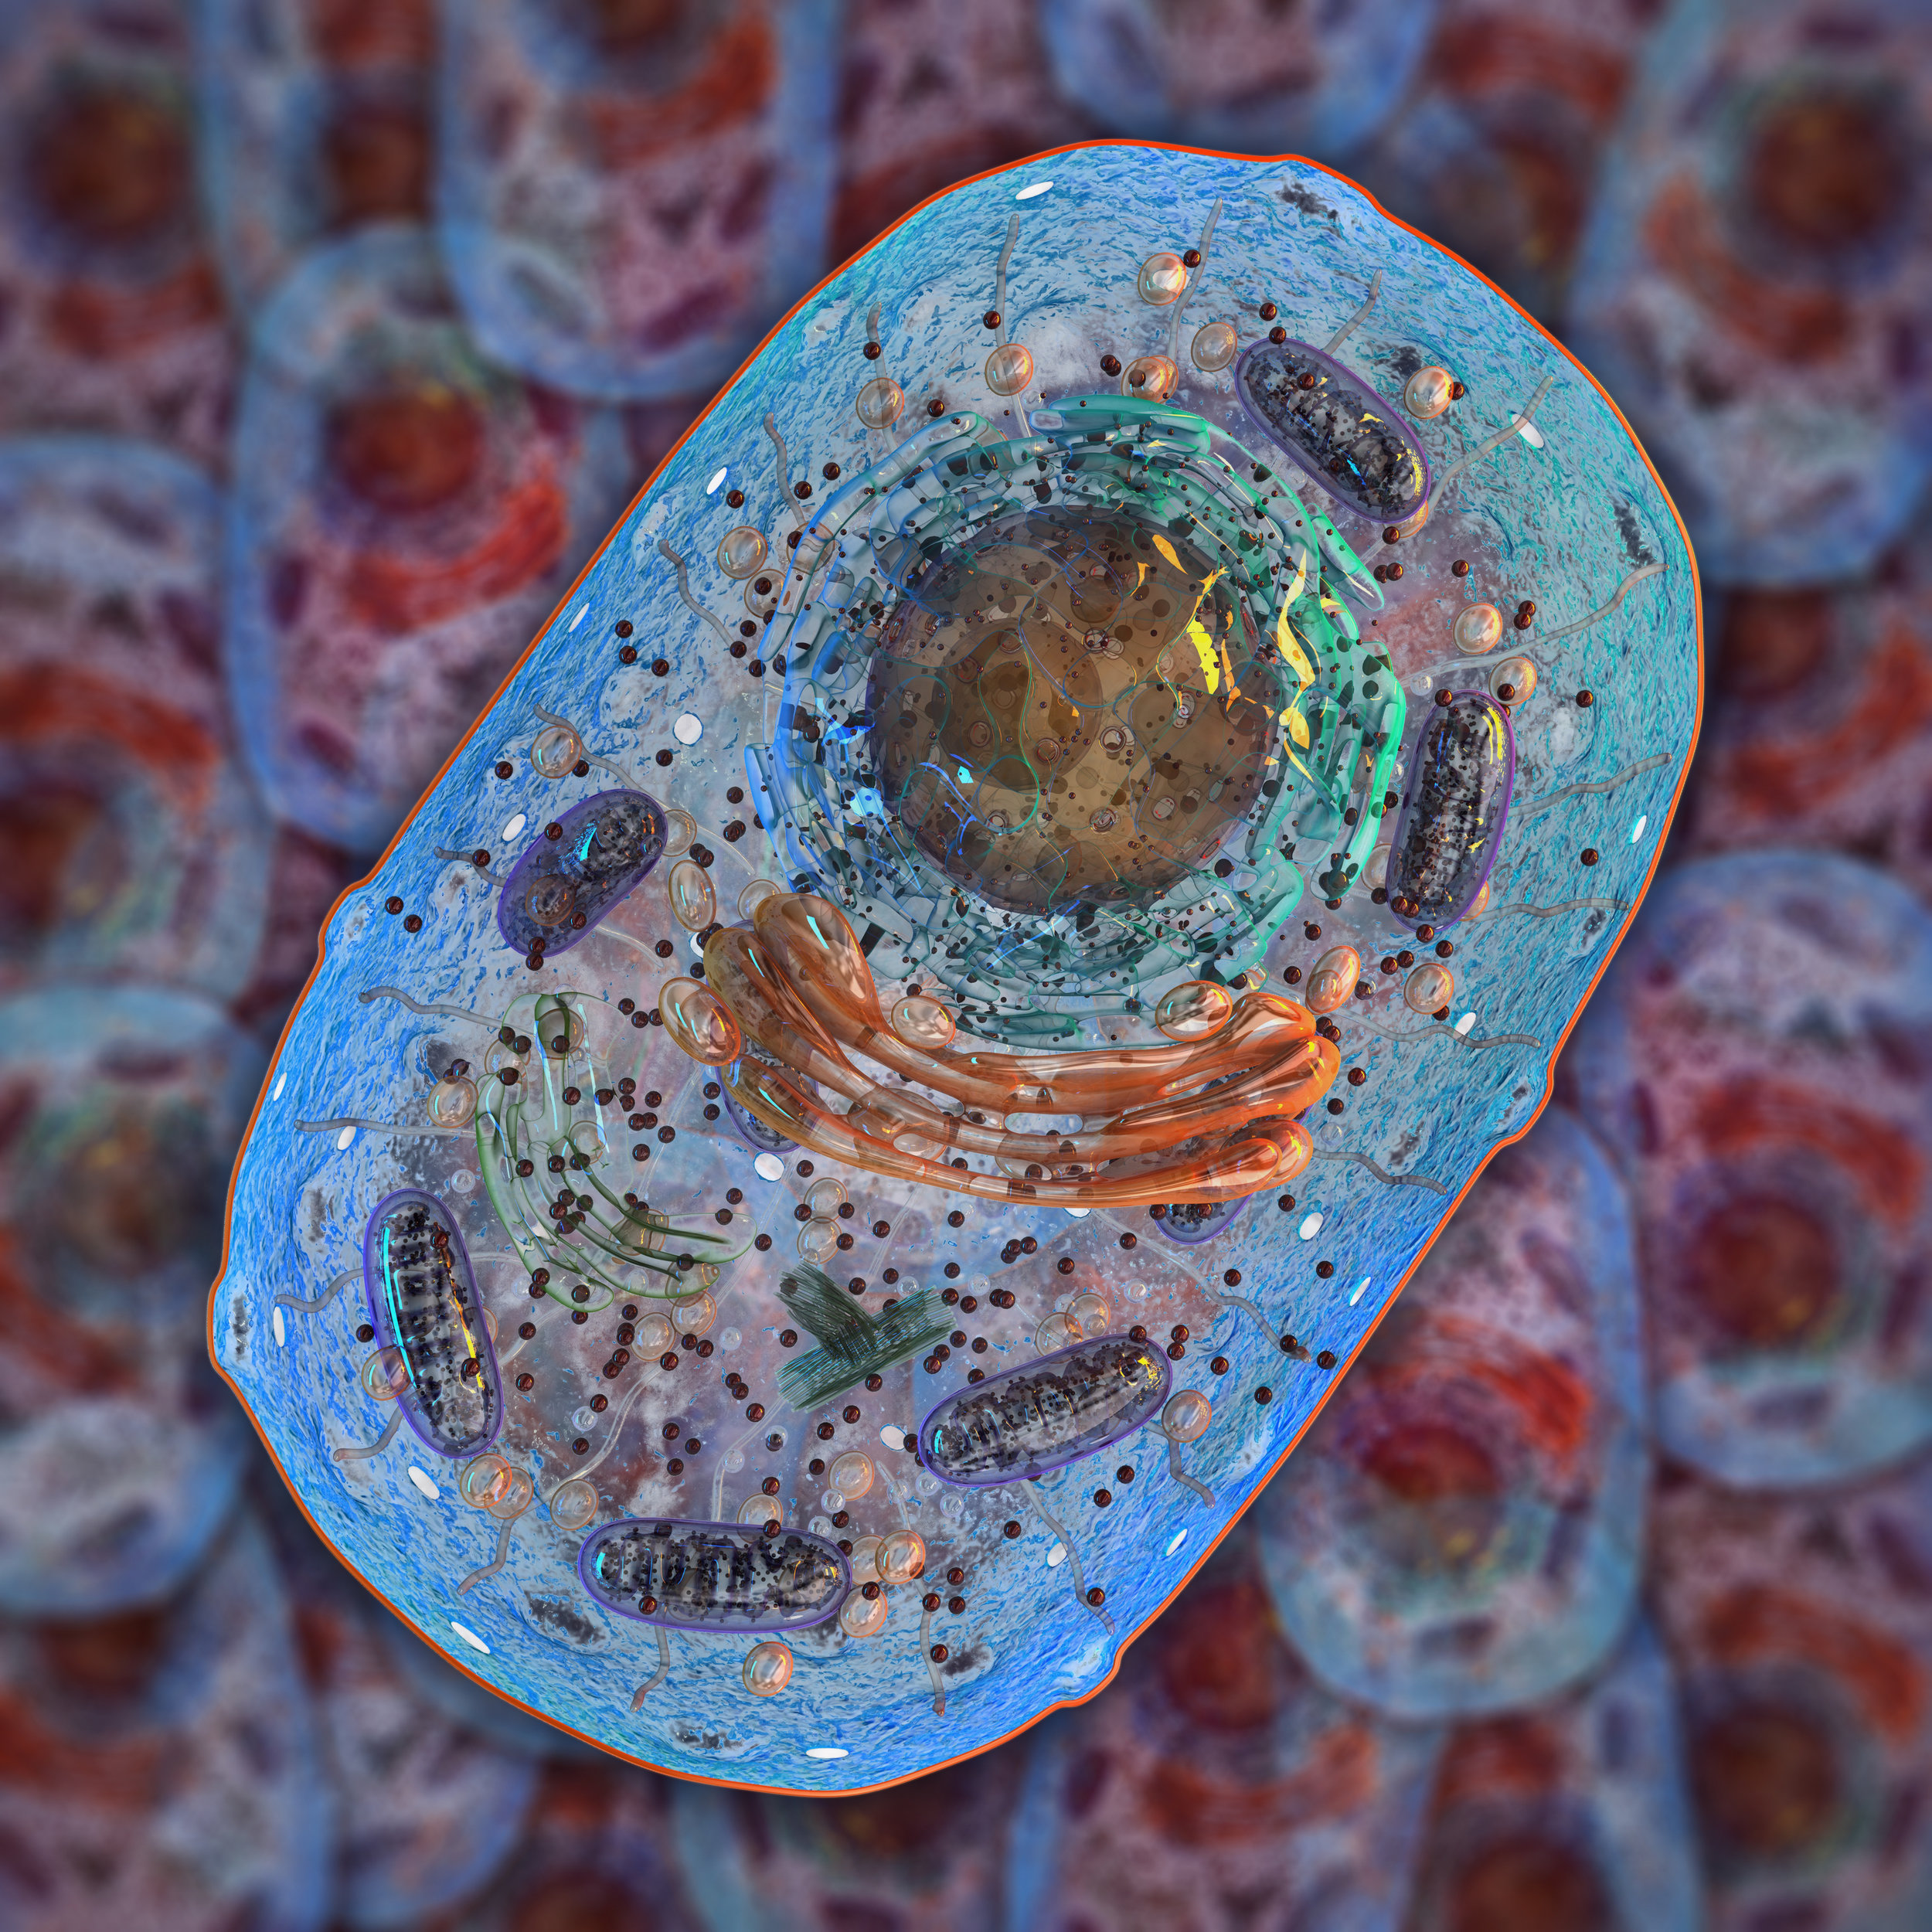  Healthy mitochondria are key to cellular energy 